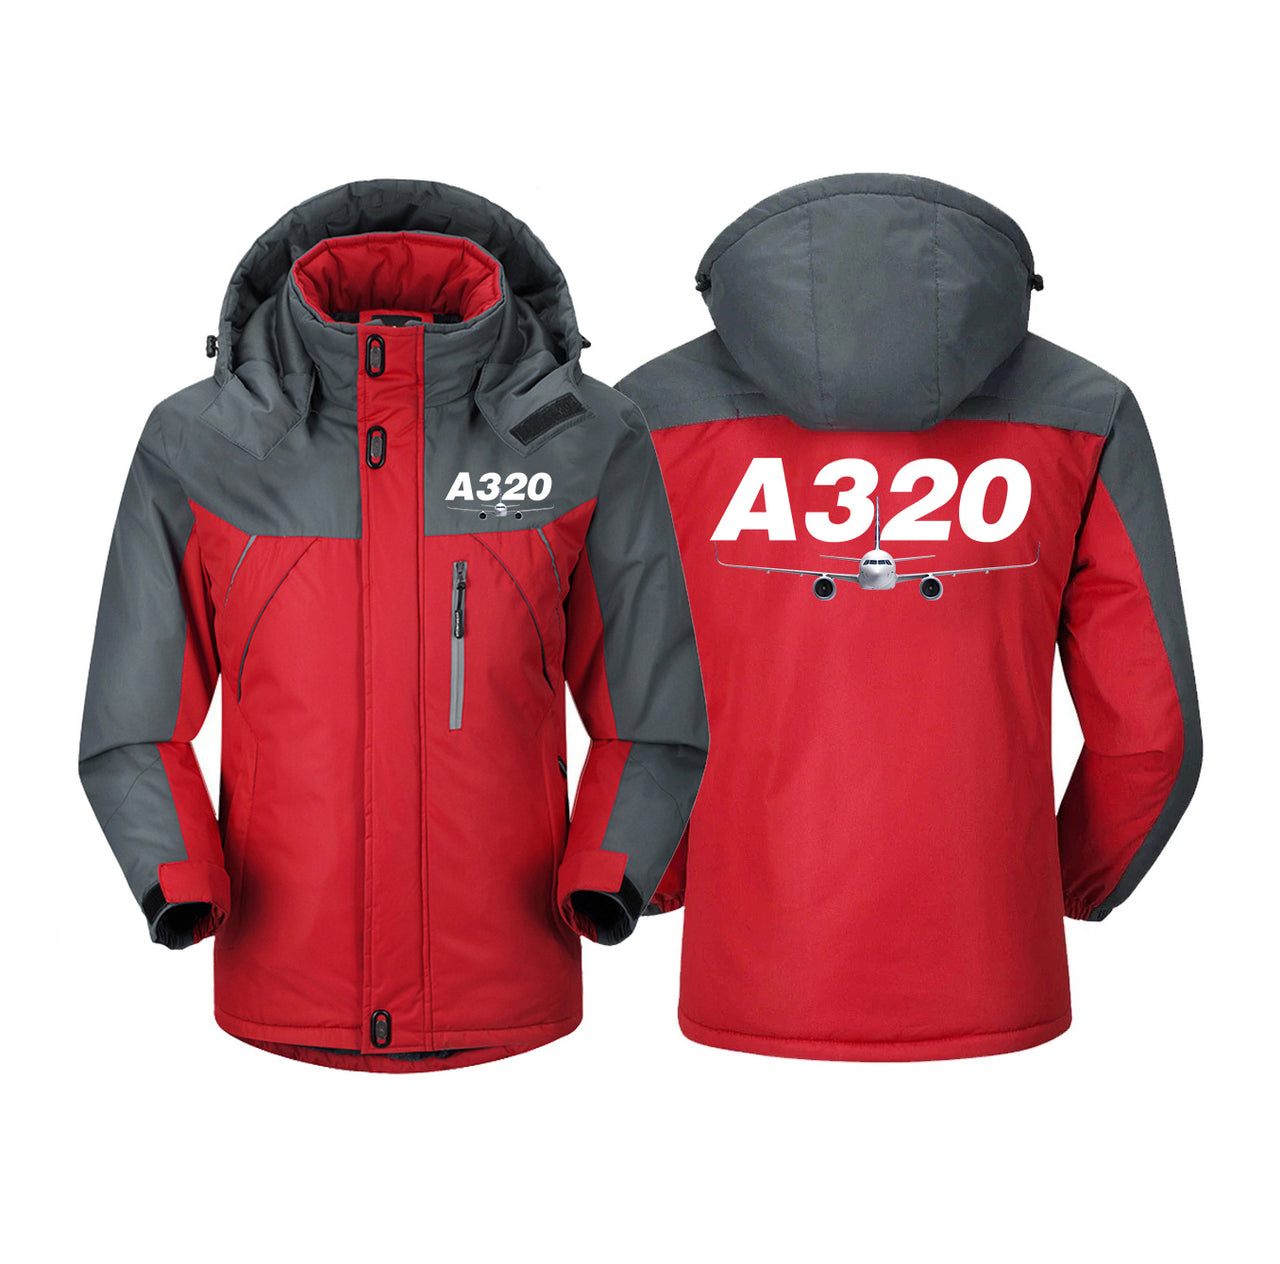 Super Airbus A320 Designed Thick Winter Jackets